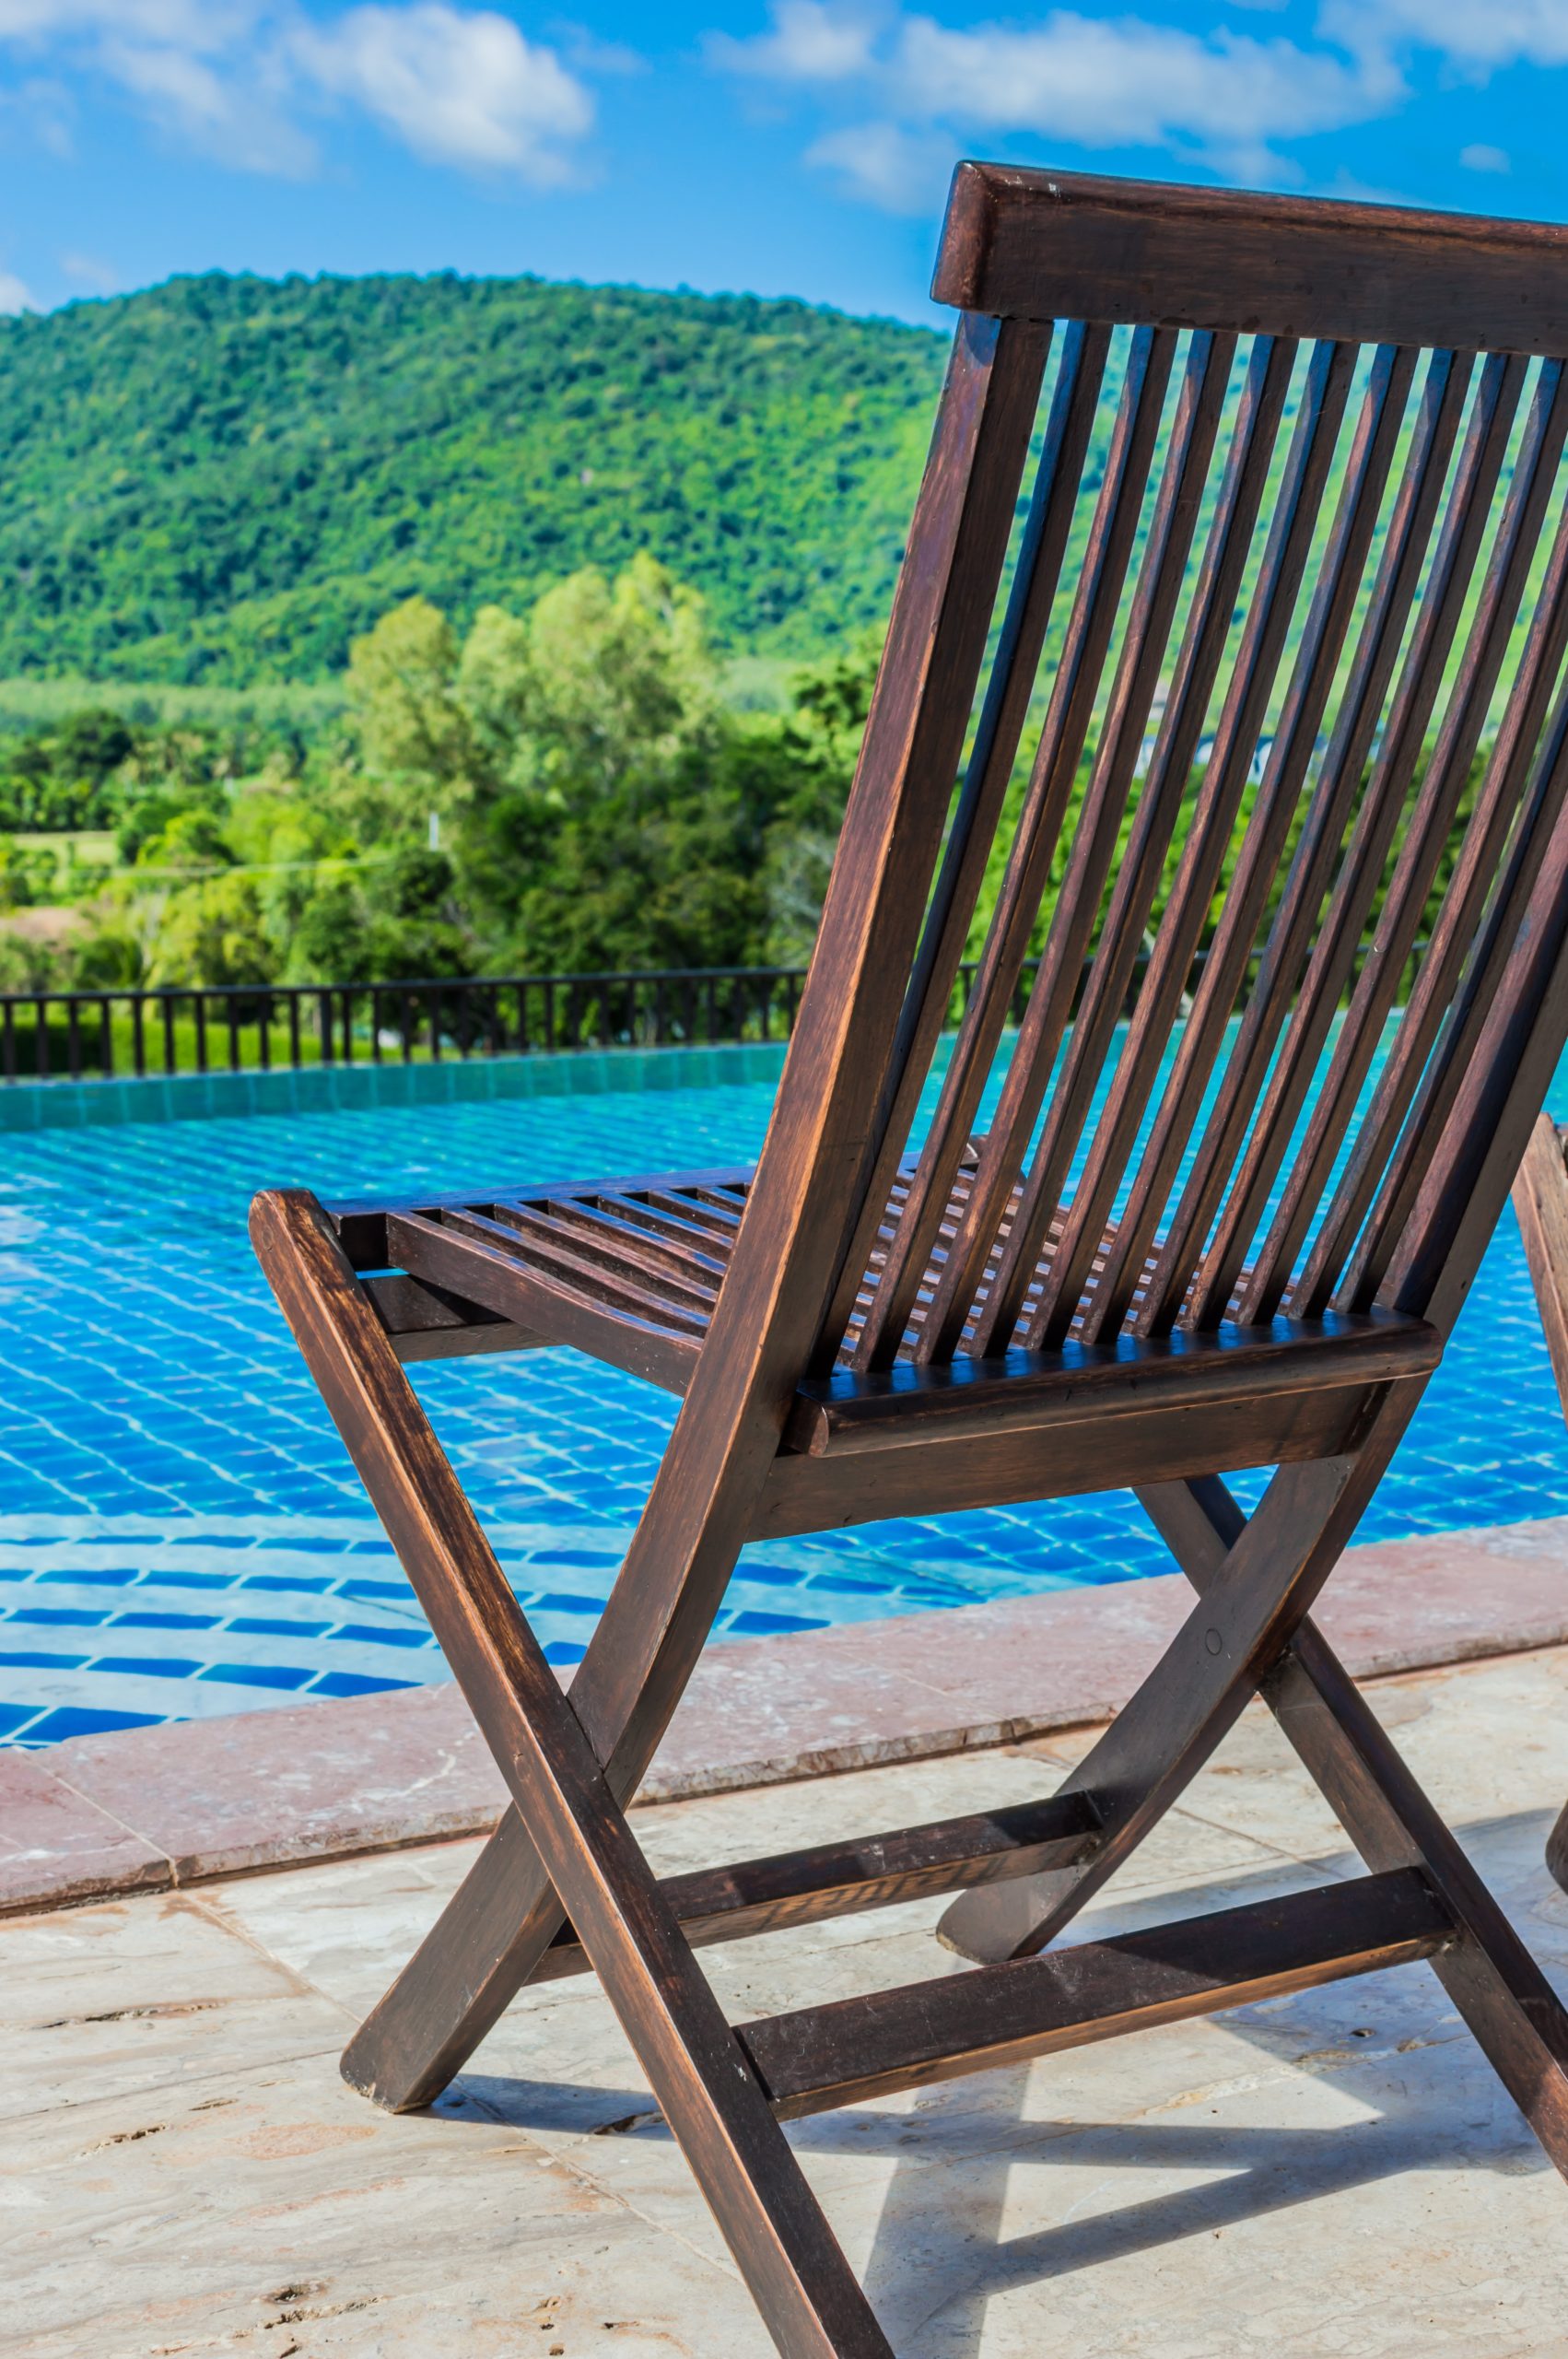 Wooden Chair Poolside - Use VoIP Phones at Home to Work Outside